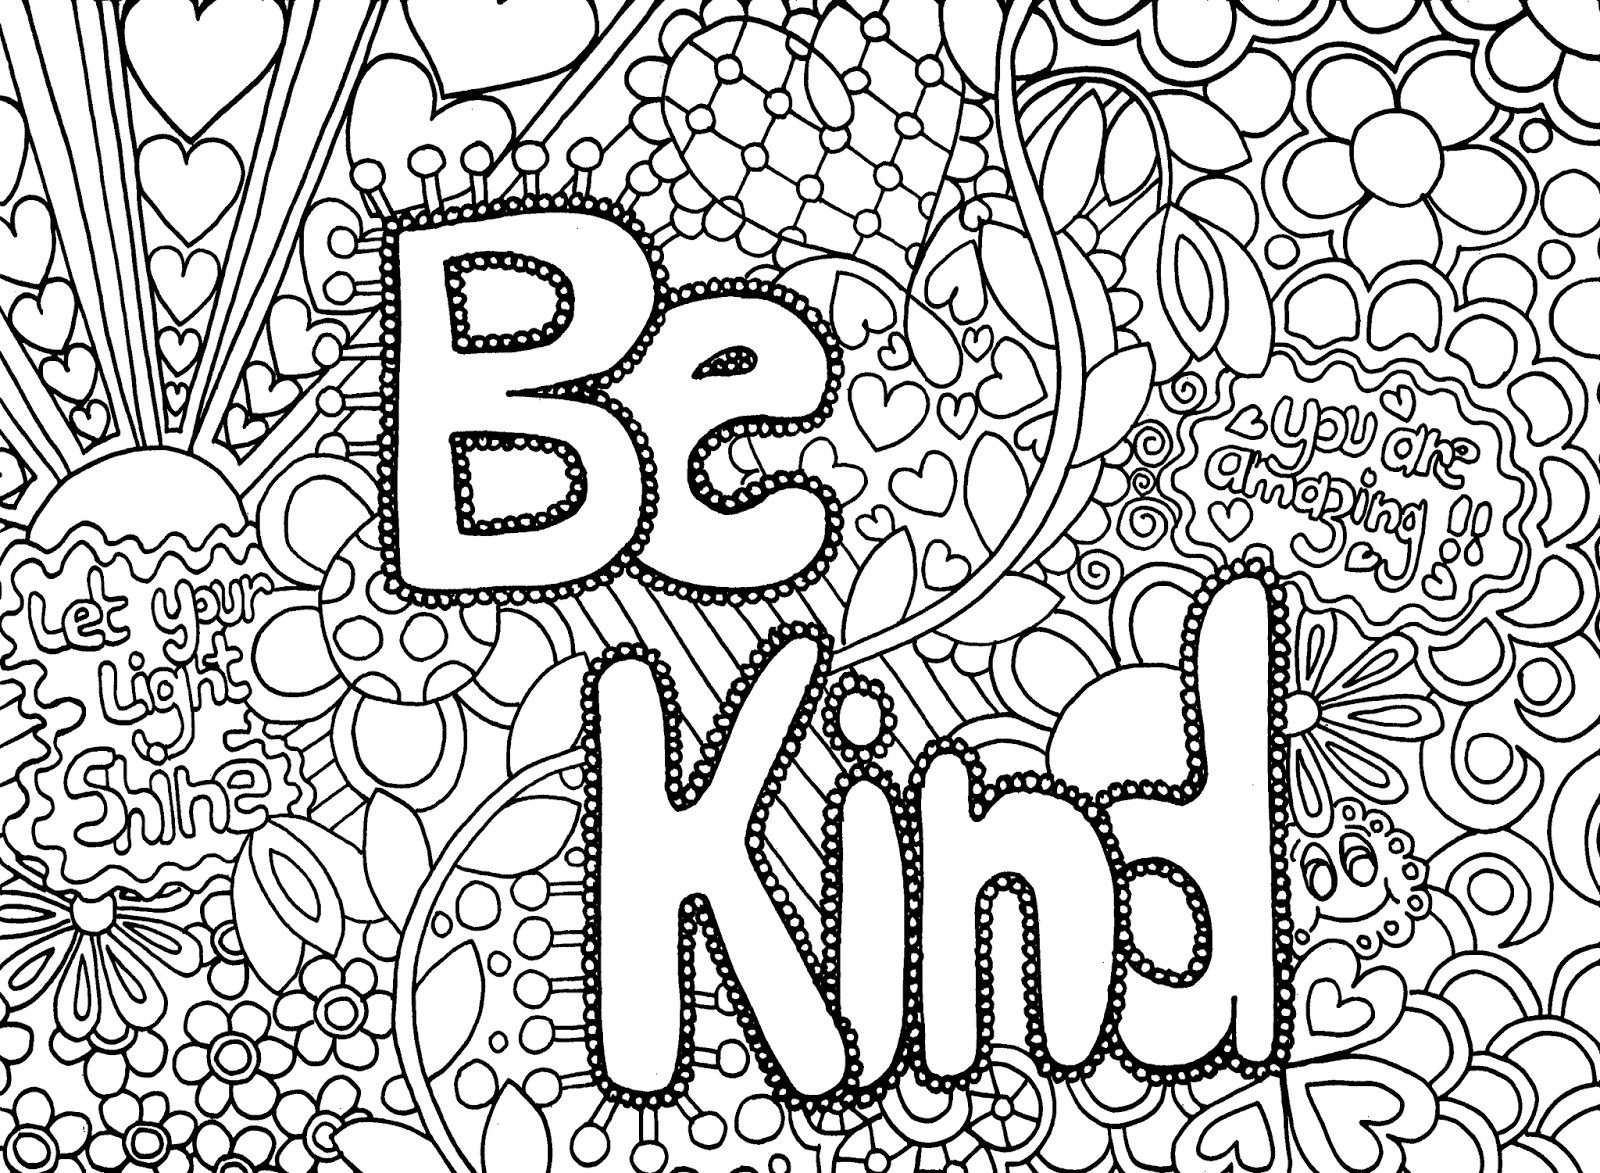 Detailed Coloring Pages For Teenage Girls
 For the last few years kid s coloring pages printed from